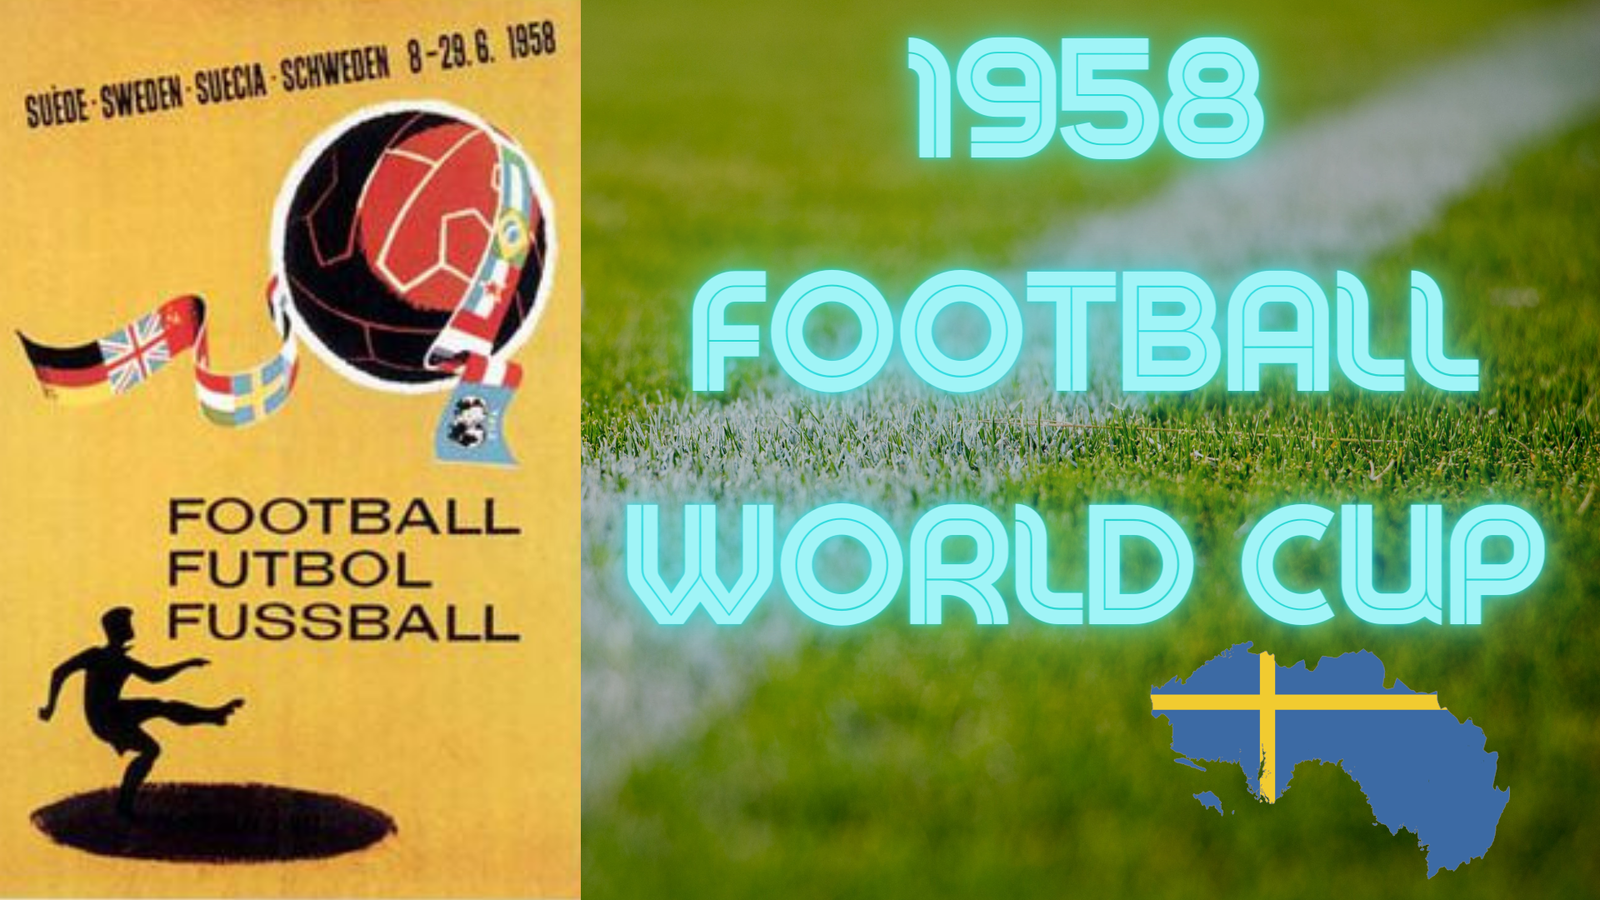 FIFA WORLD CUP 1958 Sweden